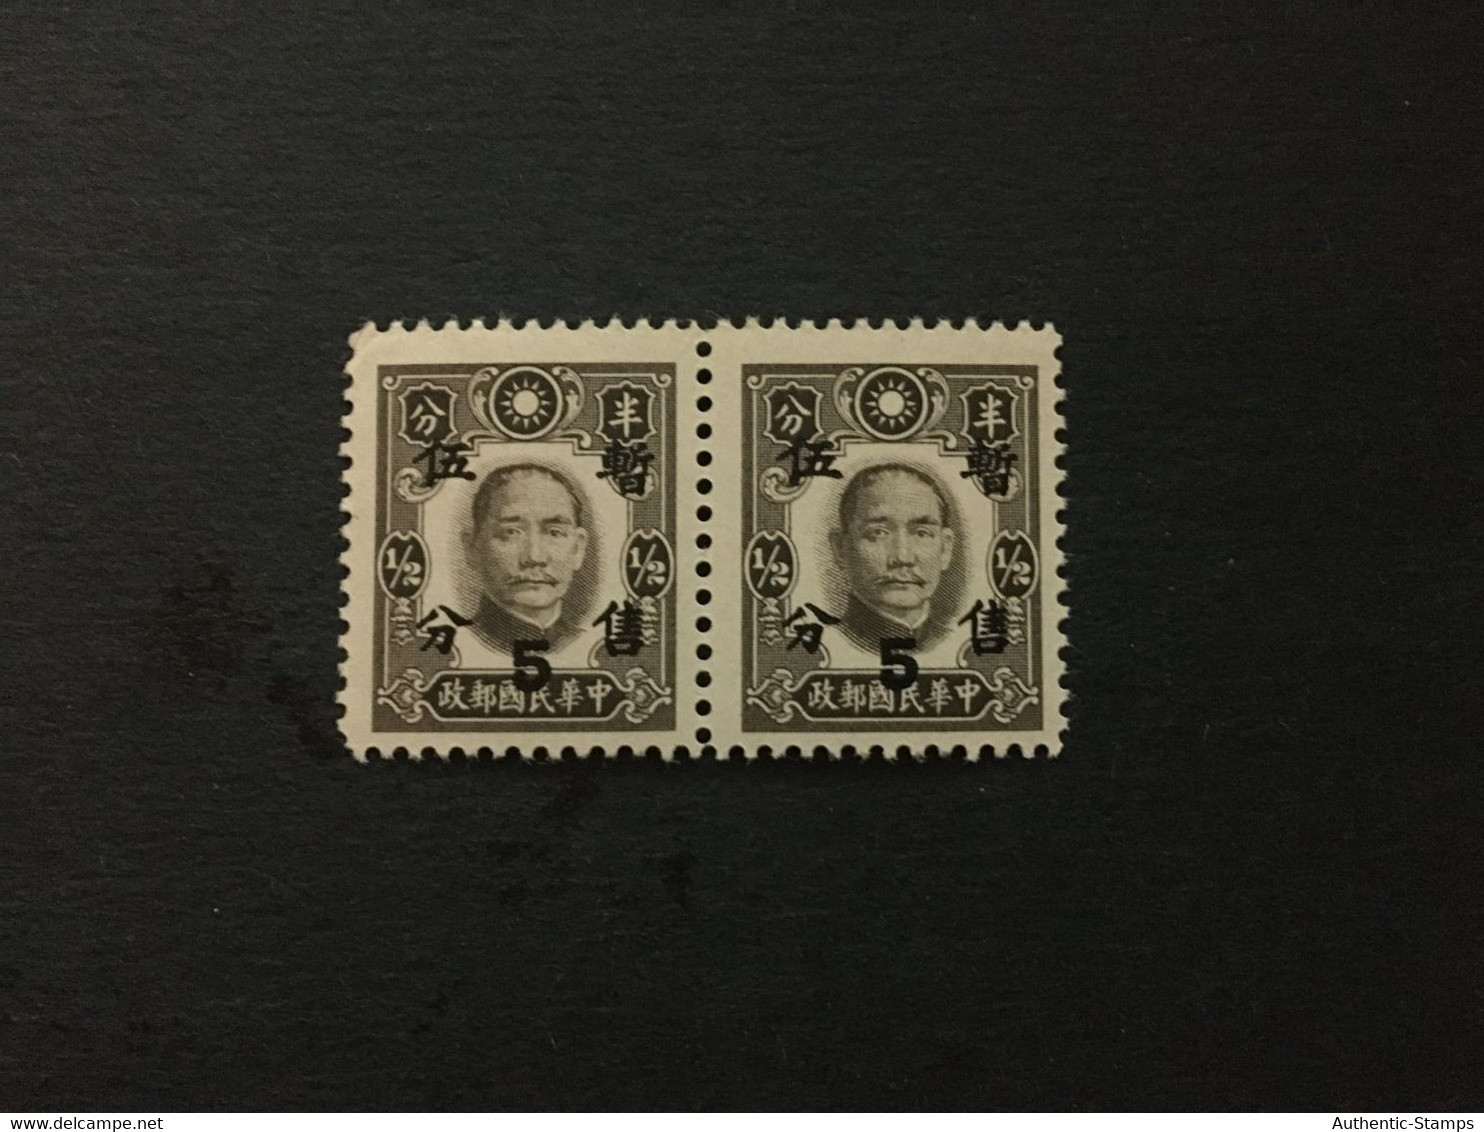 CHINA  STAMP BLOCK, MNH, JAPANESE OCCUPATION,Overprinted With “Temporarity Sold For”and Surcharged，CINA,CHINE,LIST 310 - 1943-45 Shanghái & Nankín